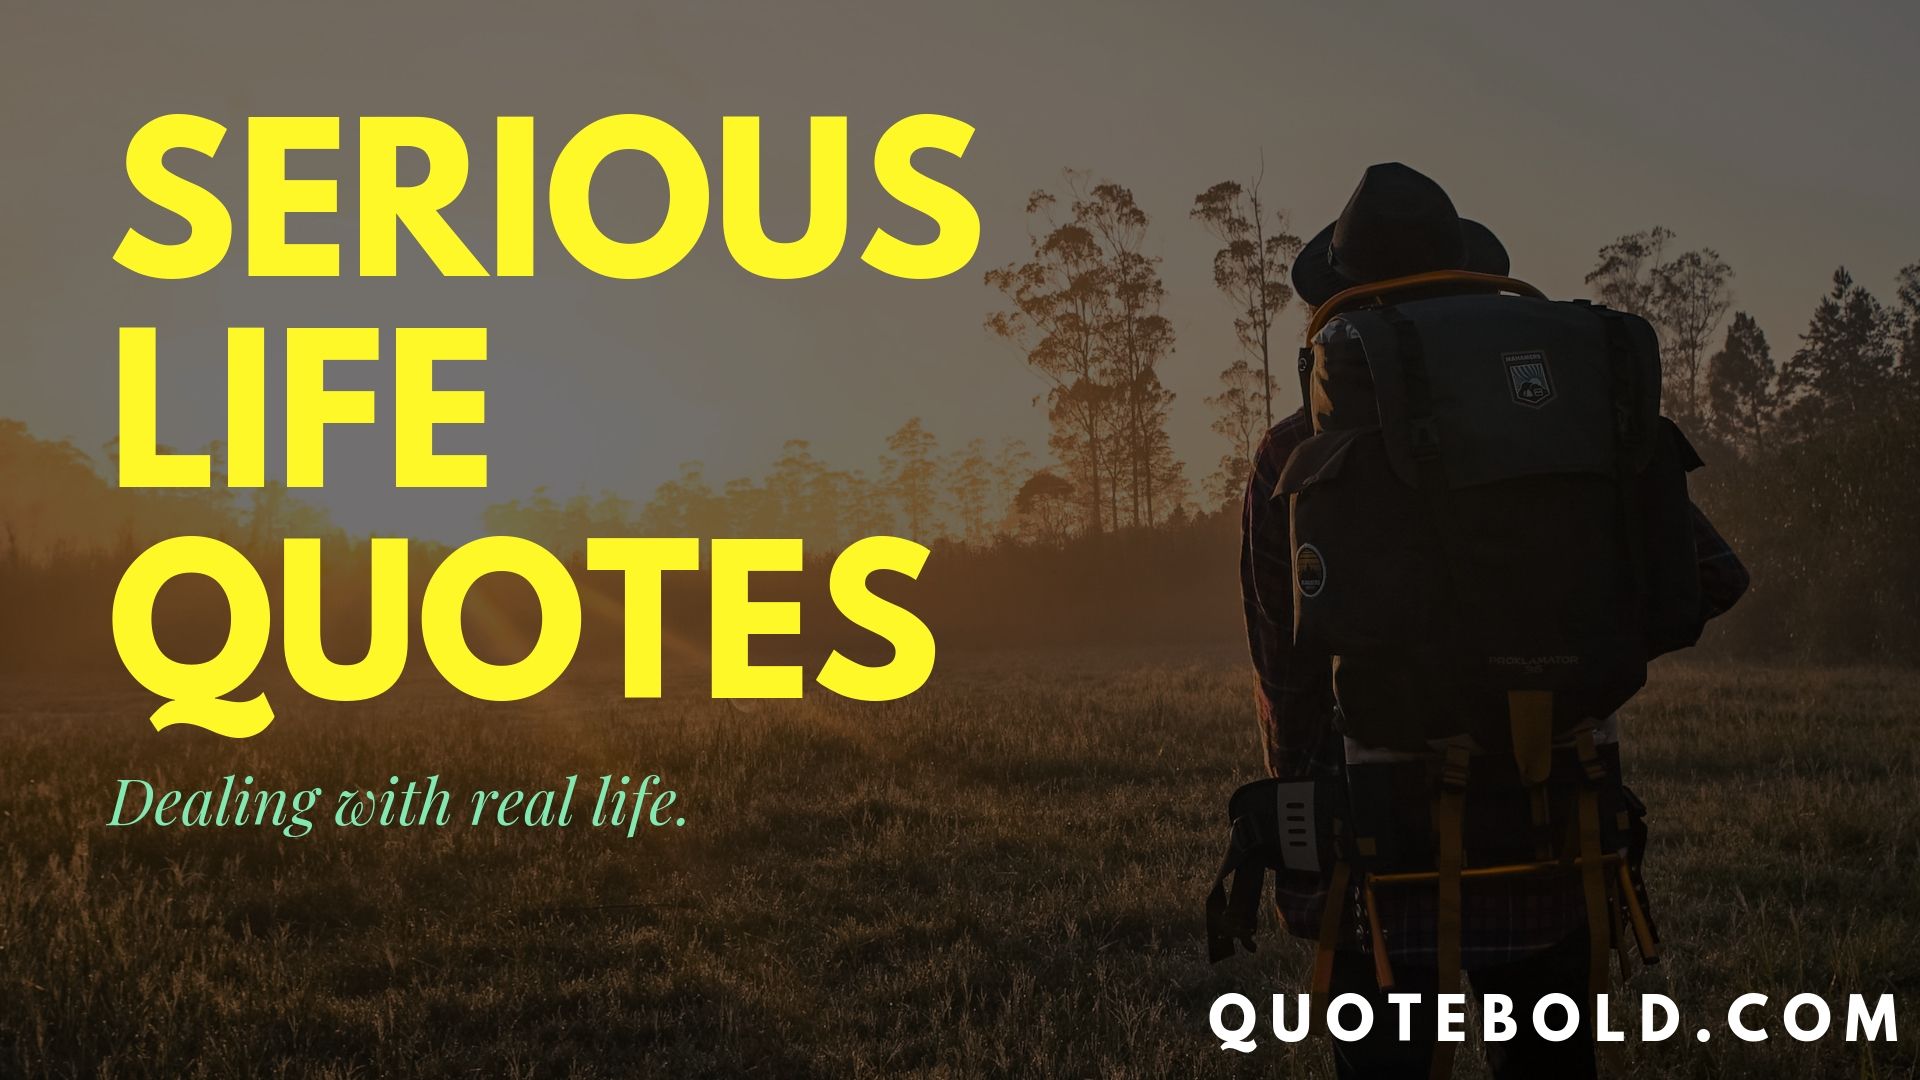 50 Serious Life Quotes & Sayings Images - QuoteBold